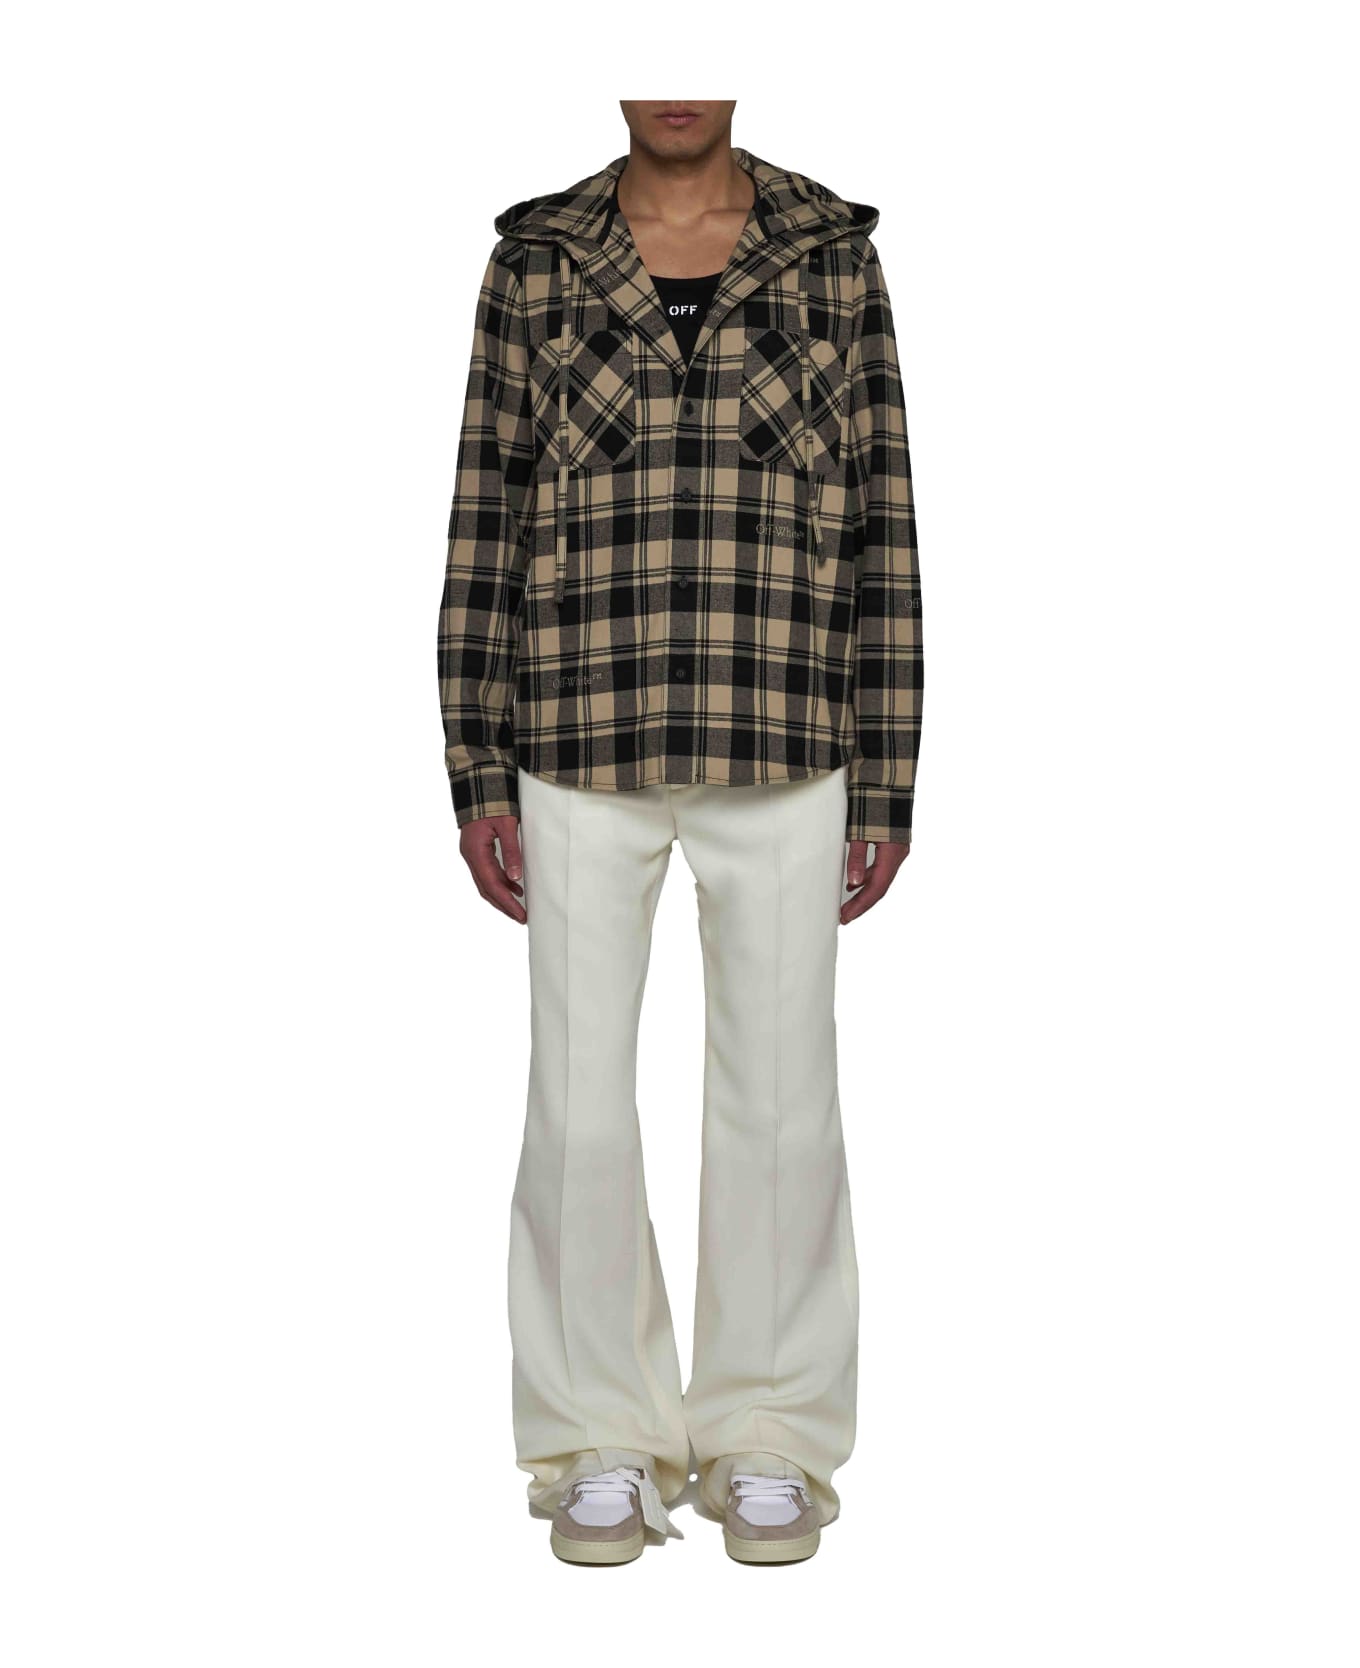 Off-White Flanel Hooded Check Shirt - Beige black no color